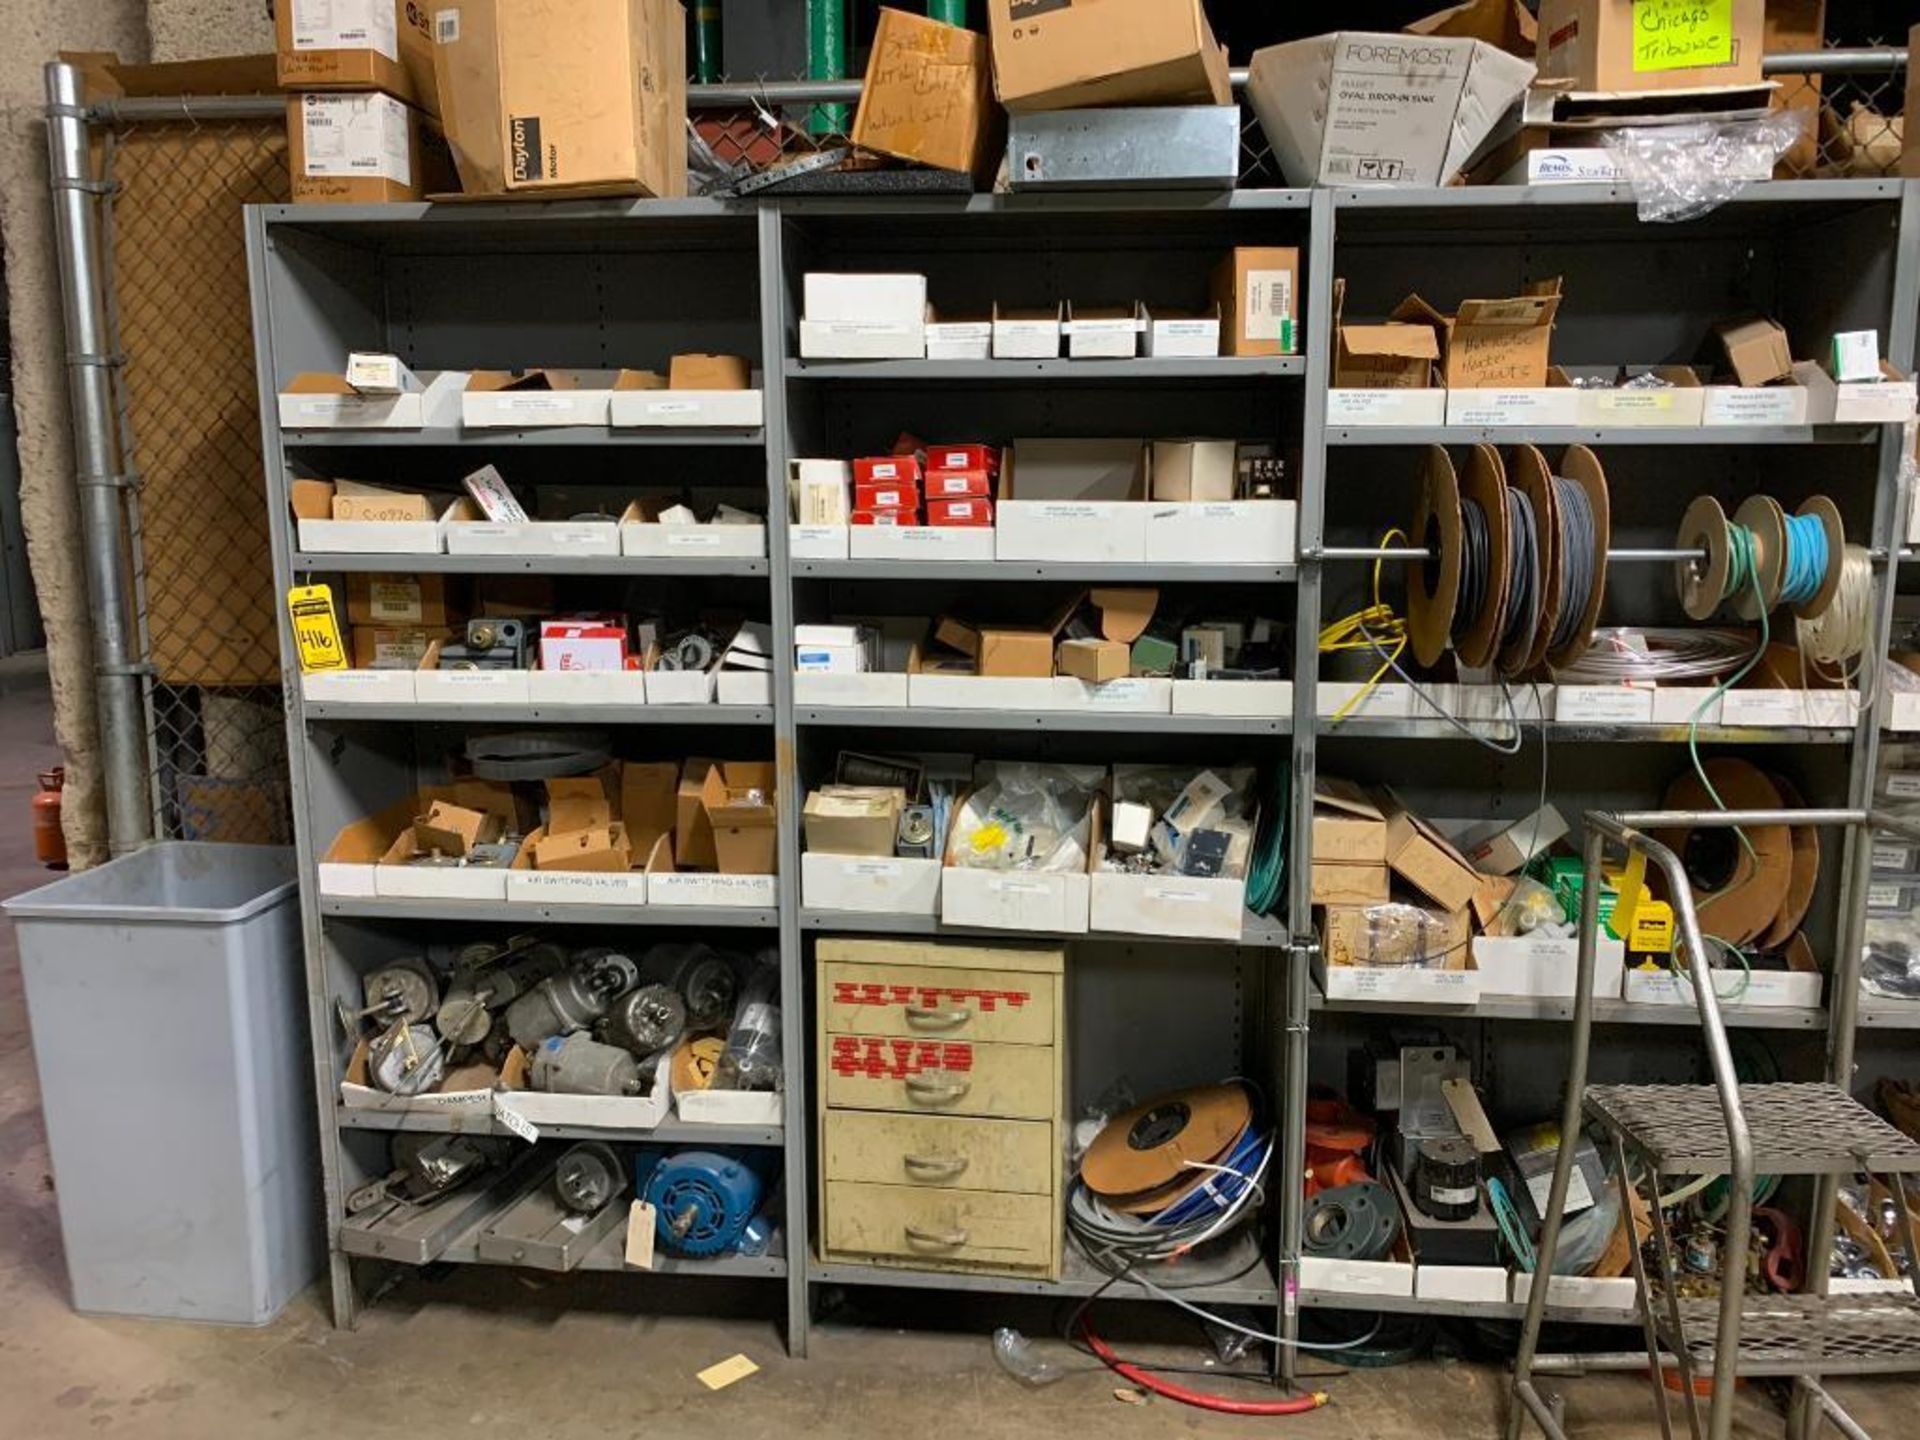 (6x) Bays of Lyon Clip-Style Shelving w/ Content; Assorted Plumbing Repair Parts, Electric Motor, Da - Image 2 of 29